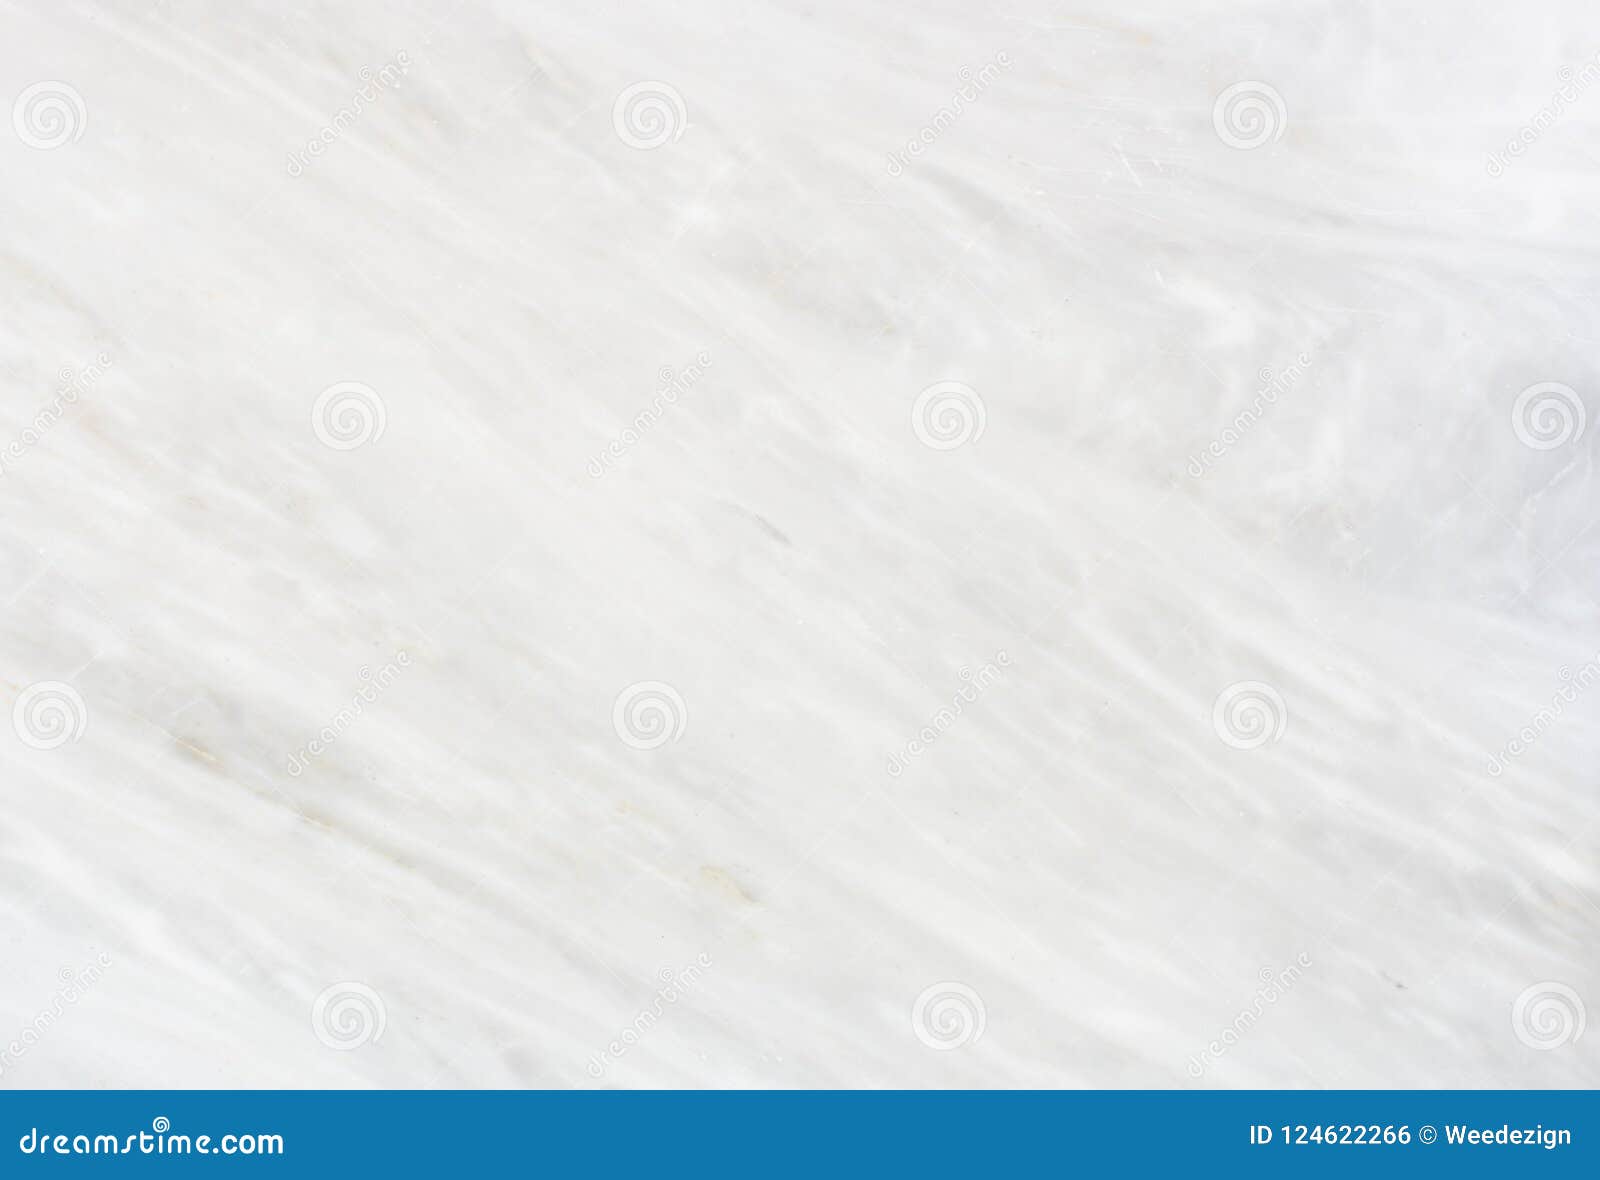 Light Grey Marble Texture Background,Luxury Look Table Top. Stock Photo -  Image of fashion, gray: 124622266